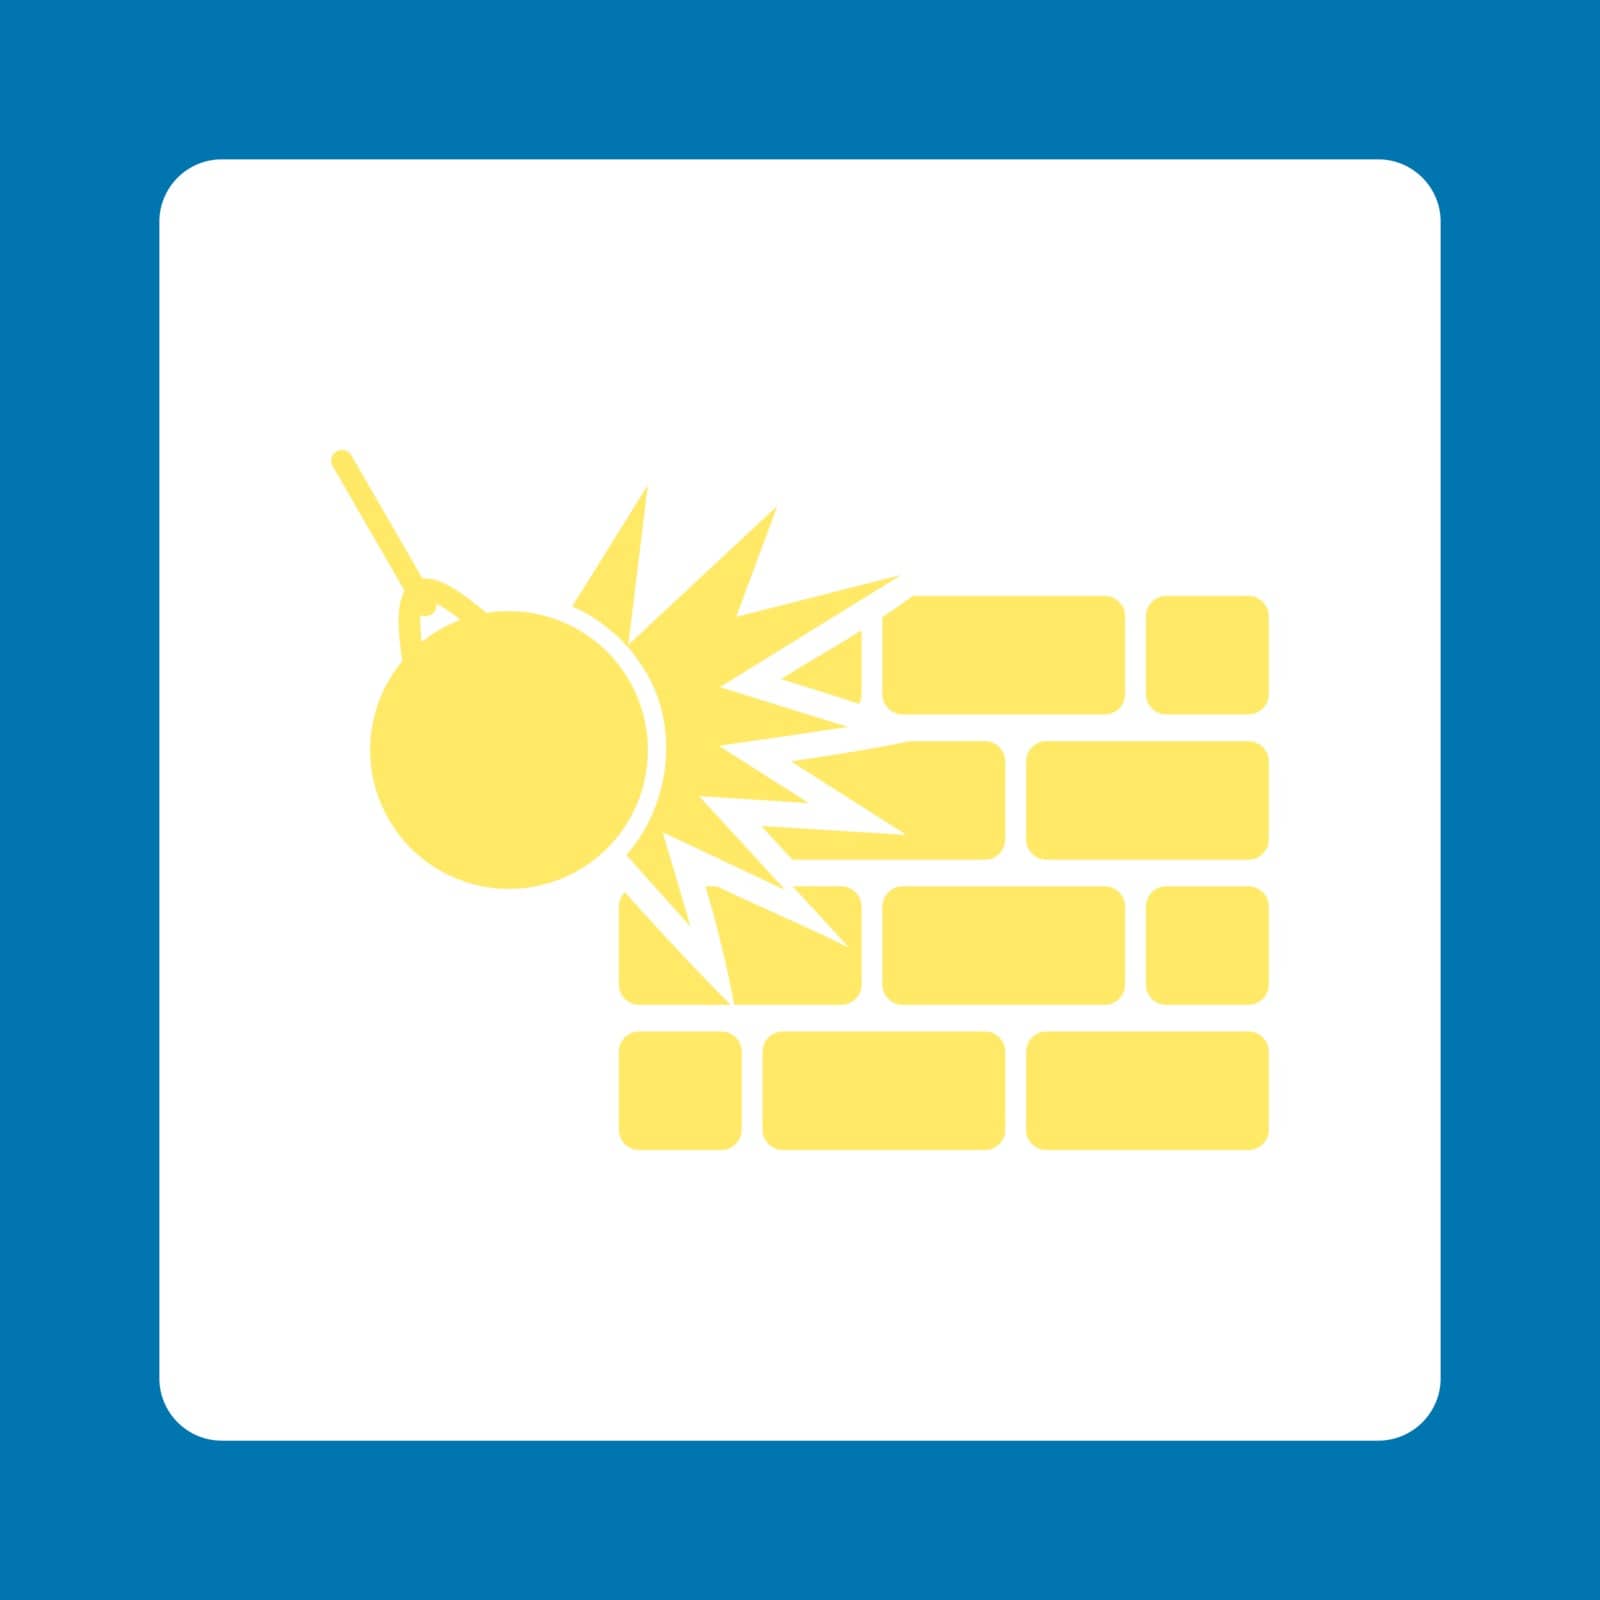 Destruction icon. Vector style is yellow and white colors, flat rounded square button on a blue background.